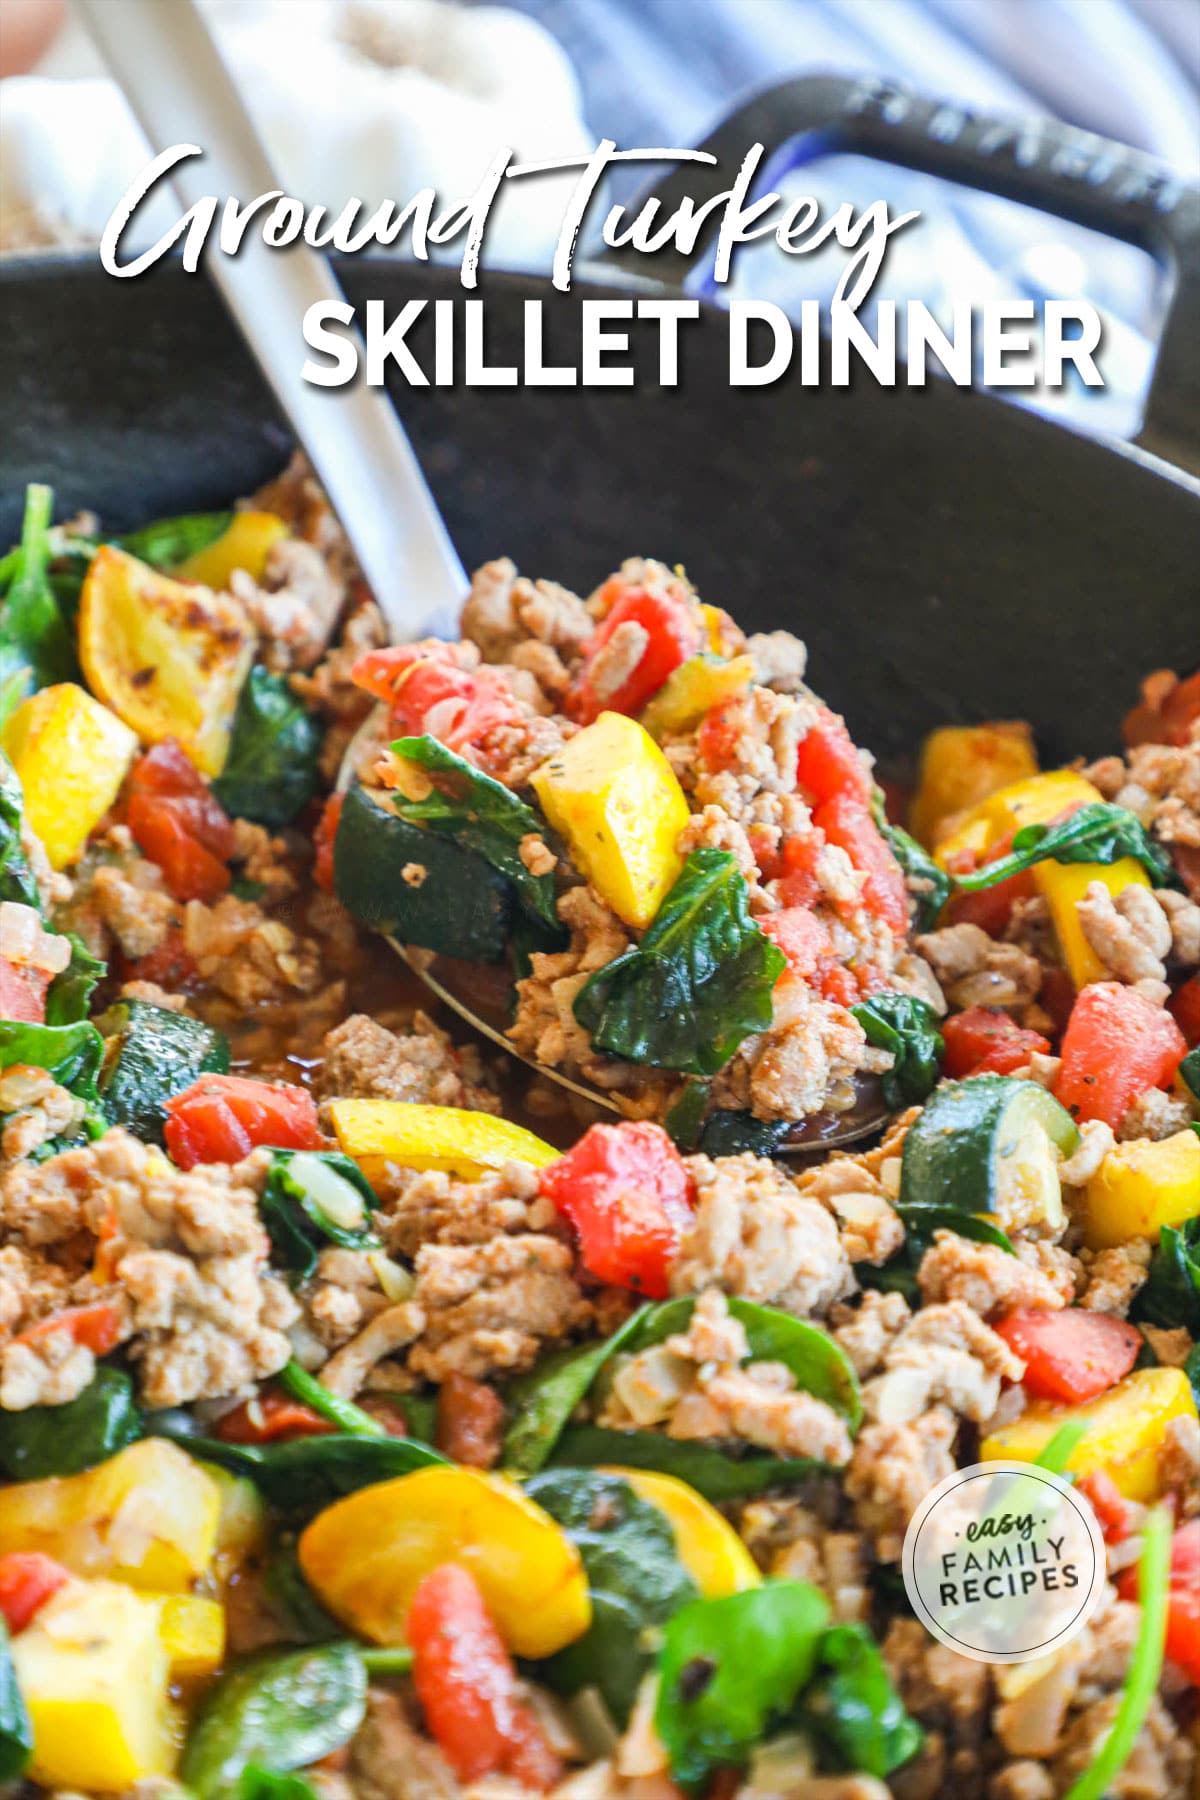 An Italian ground turkey skillet with tomatoes, spinach, green, and yellow squash.